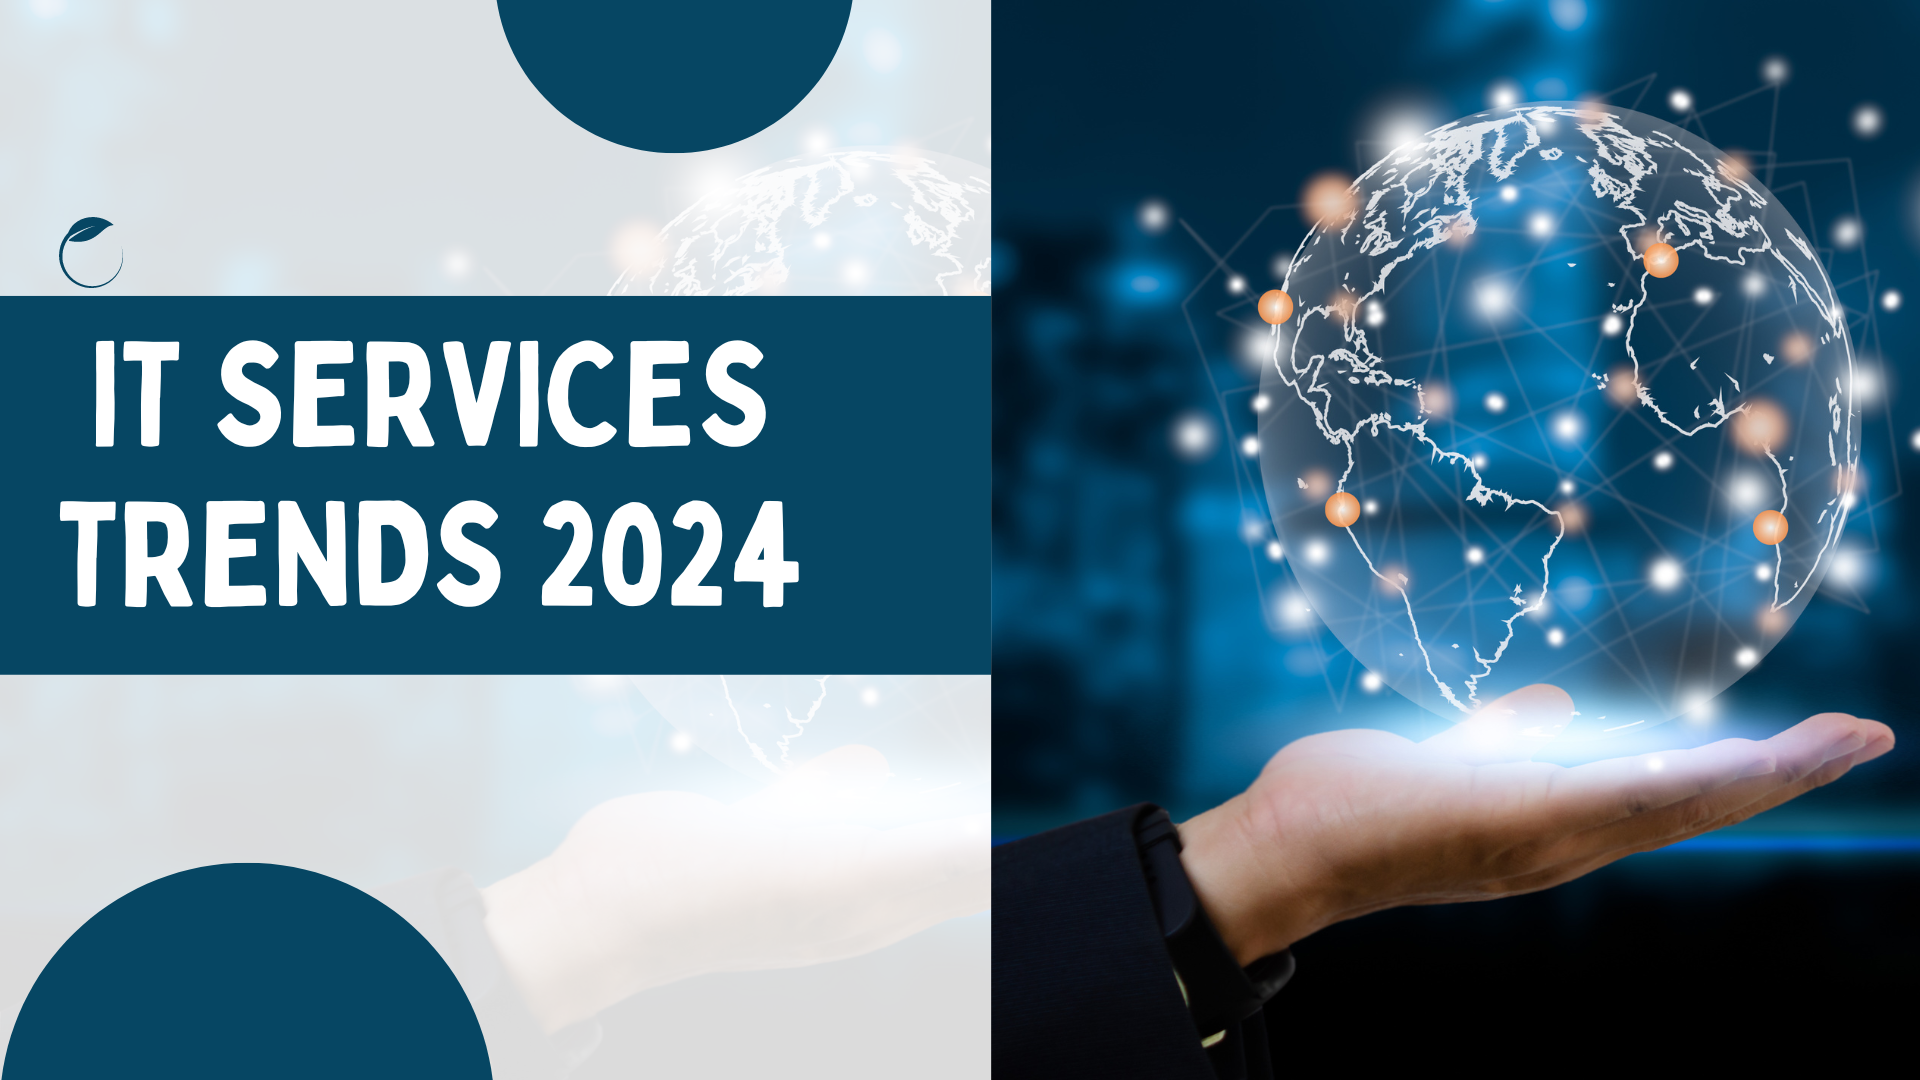 Top IT services industry trends for 2024: IT Services trends